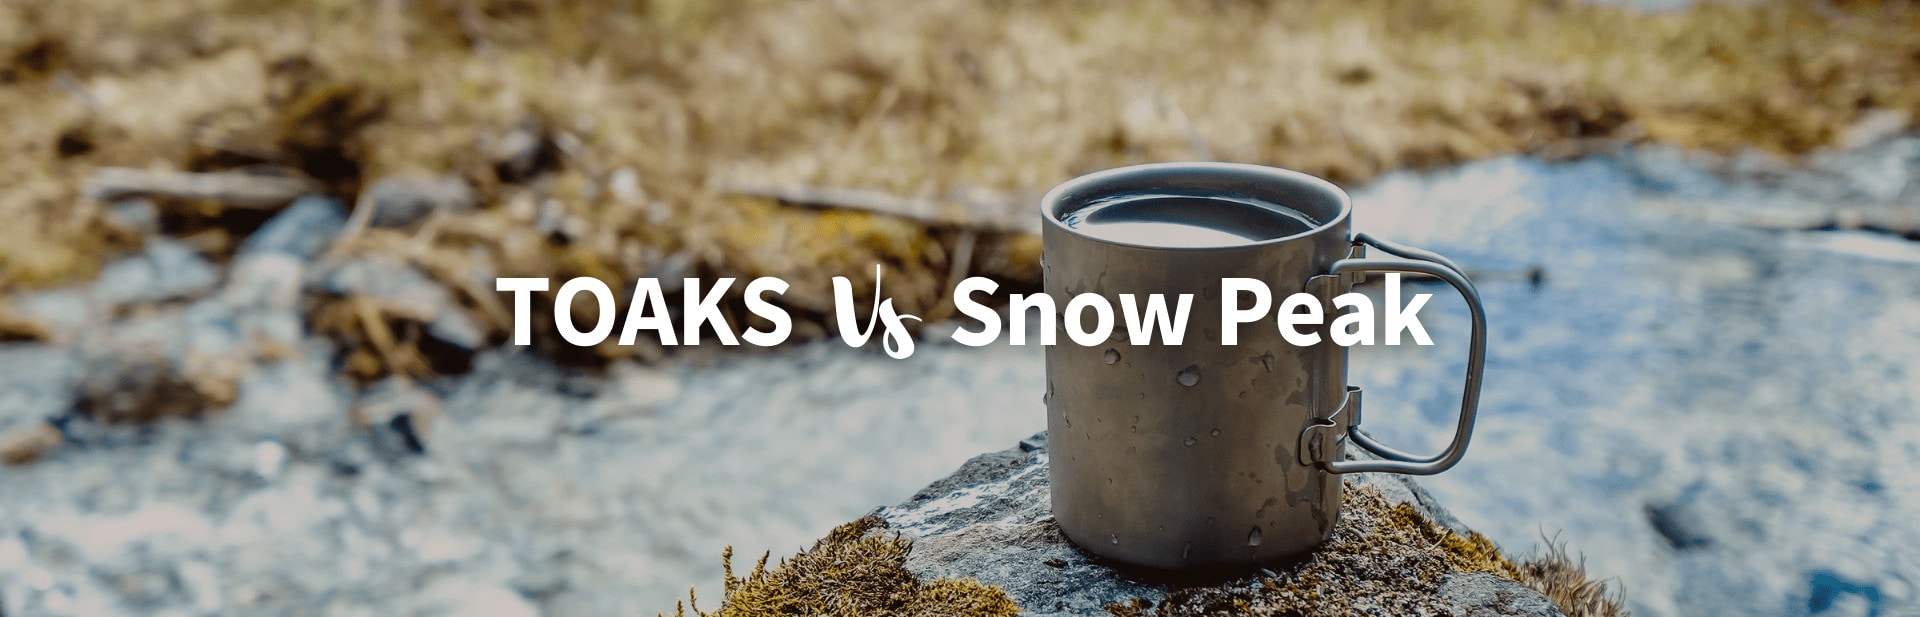 TOAKS vs. Snow Peak: Which Cookset is Better?